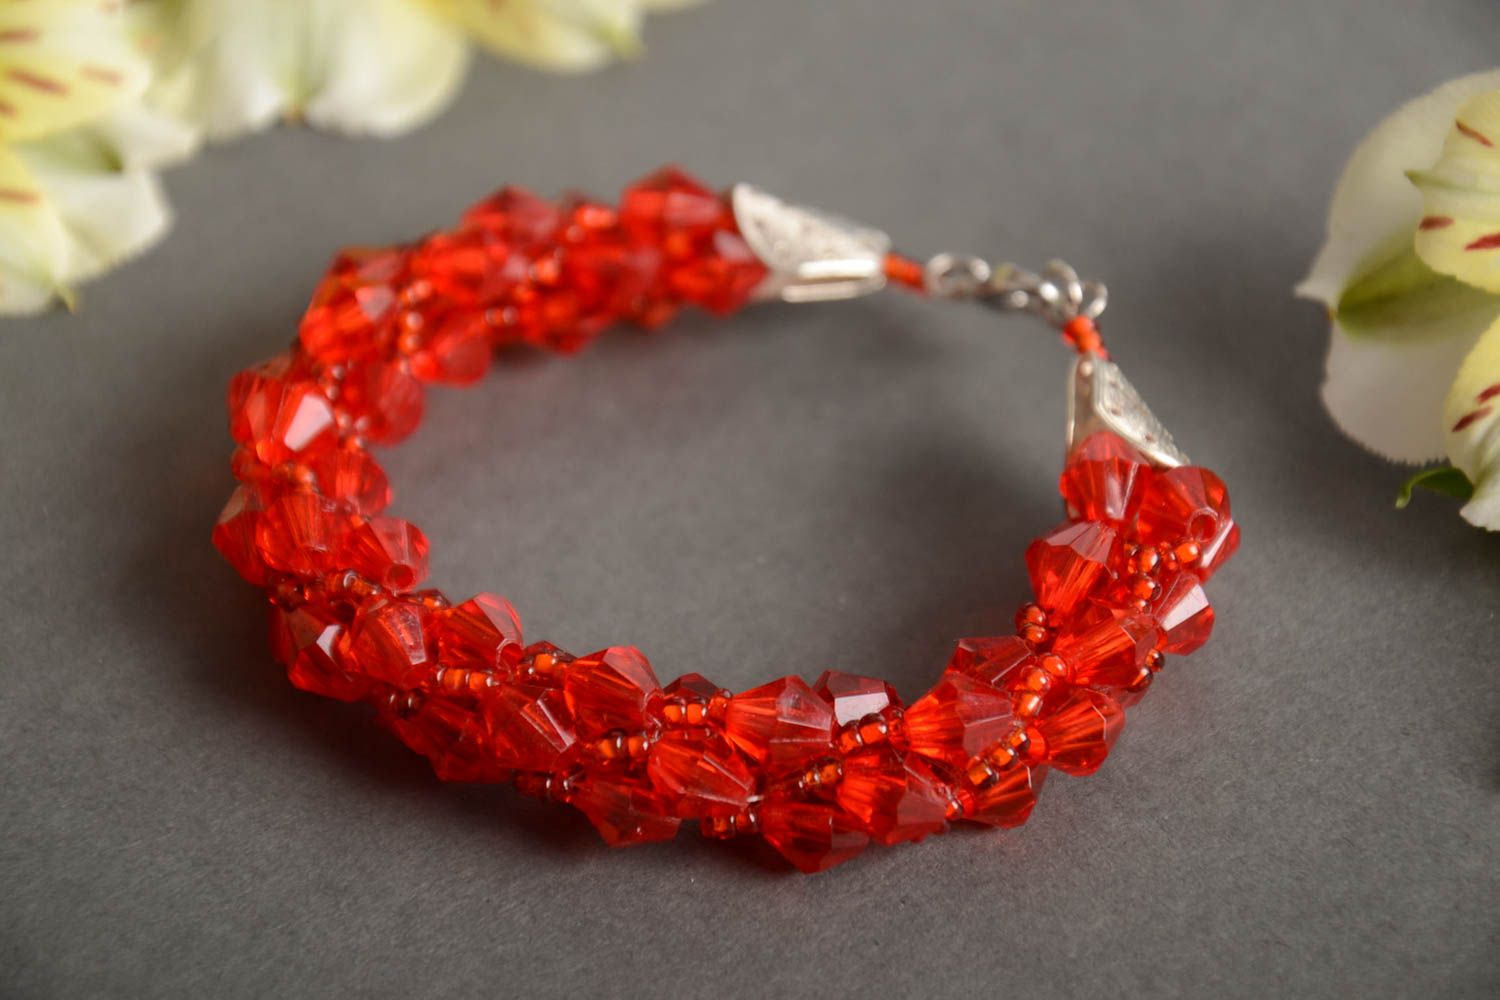 Handmade wrist bracelet crocheted of red Czech seed beads and faceted beads photo 1